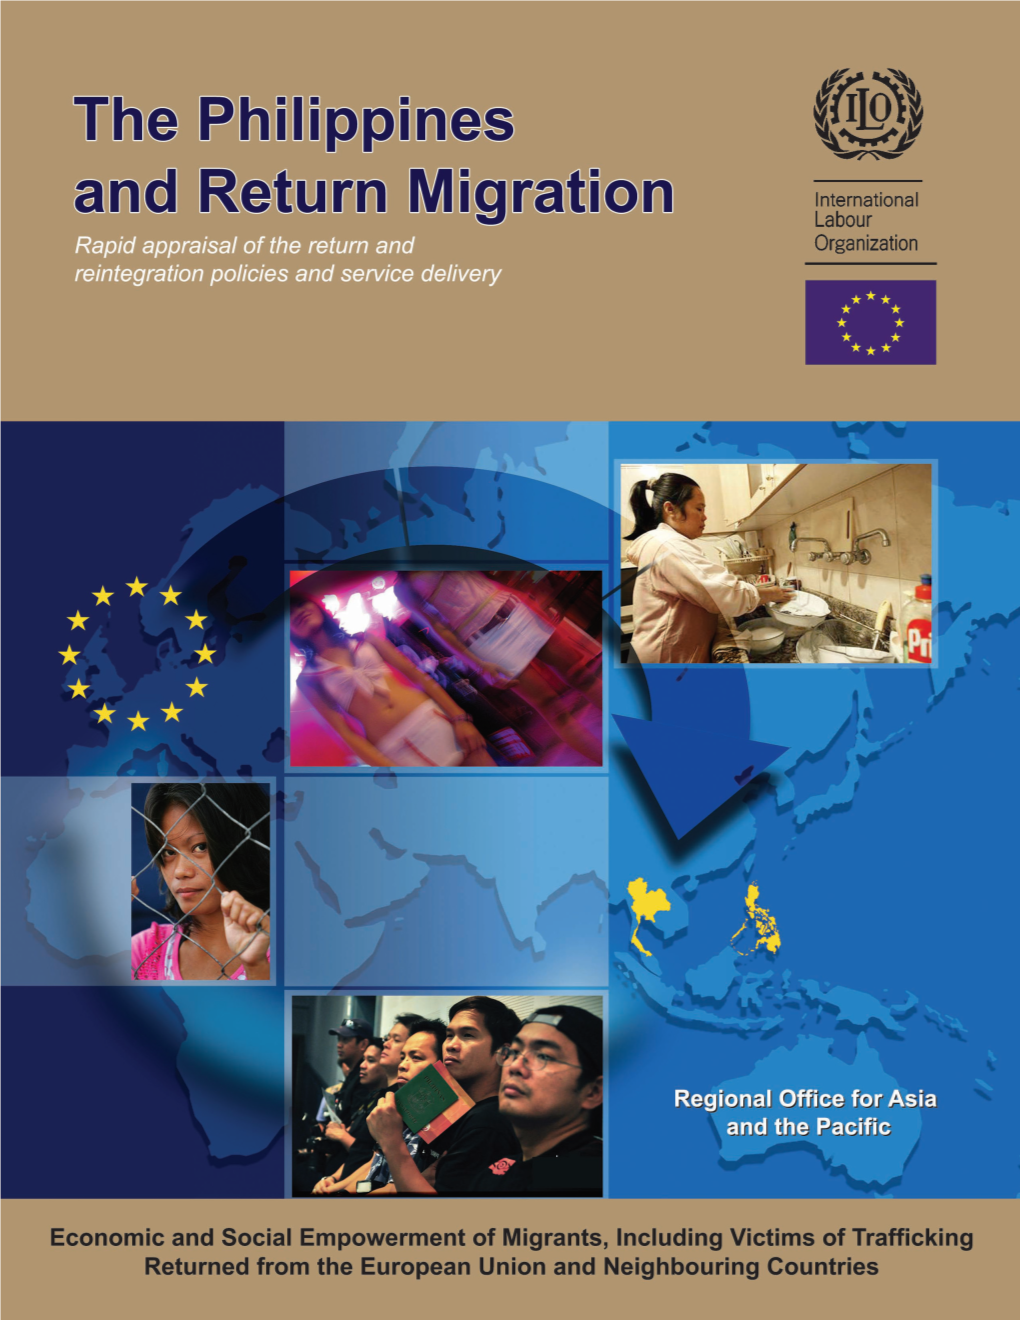 The Philippines and Return Migration